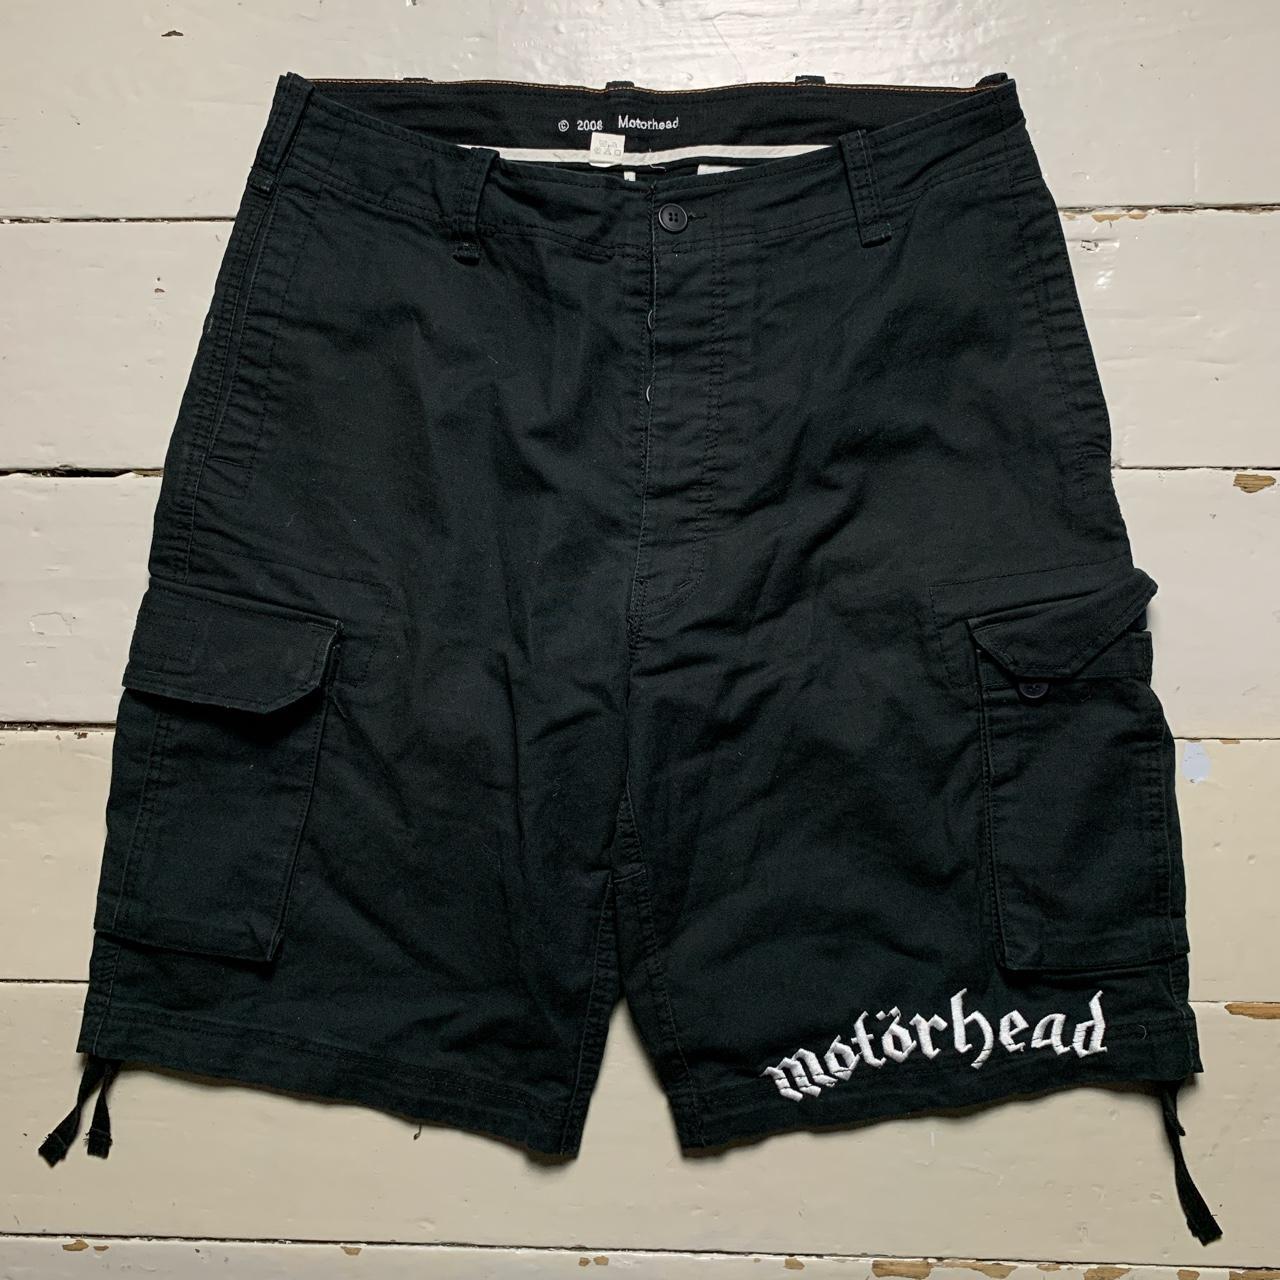 Motörhead 2008 Cargo Shorts Black and White Embroidery